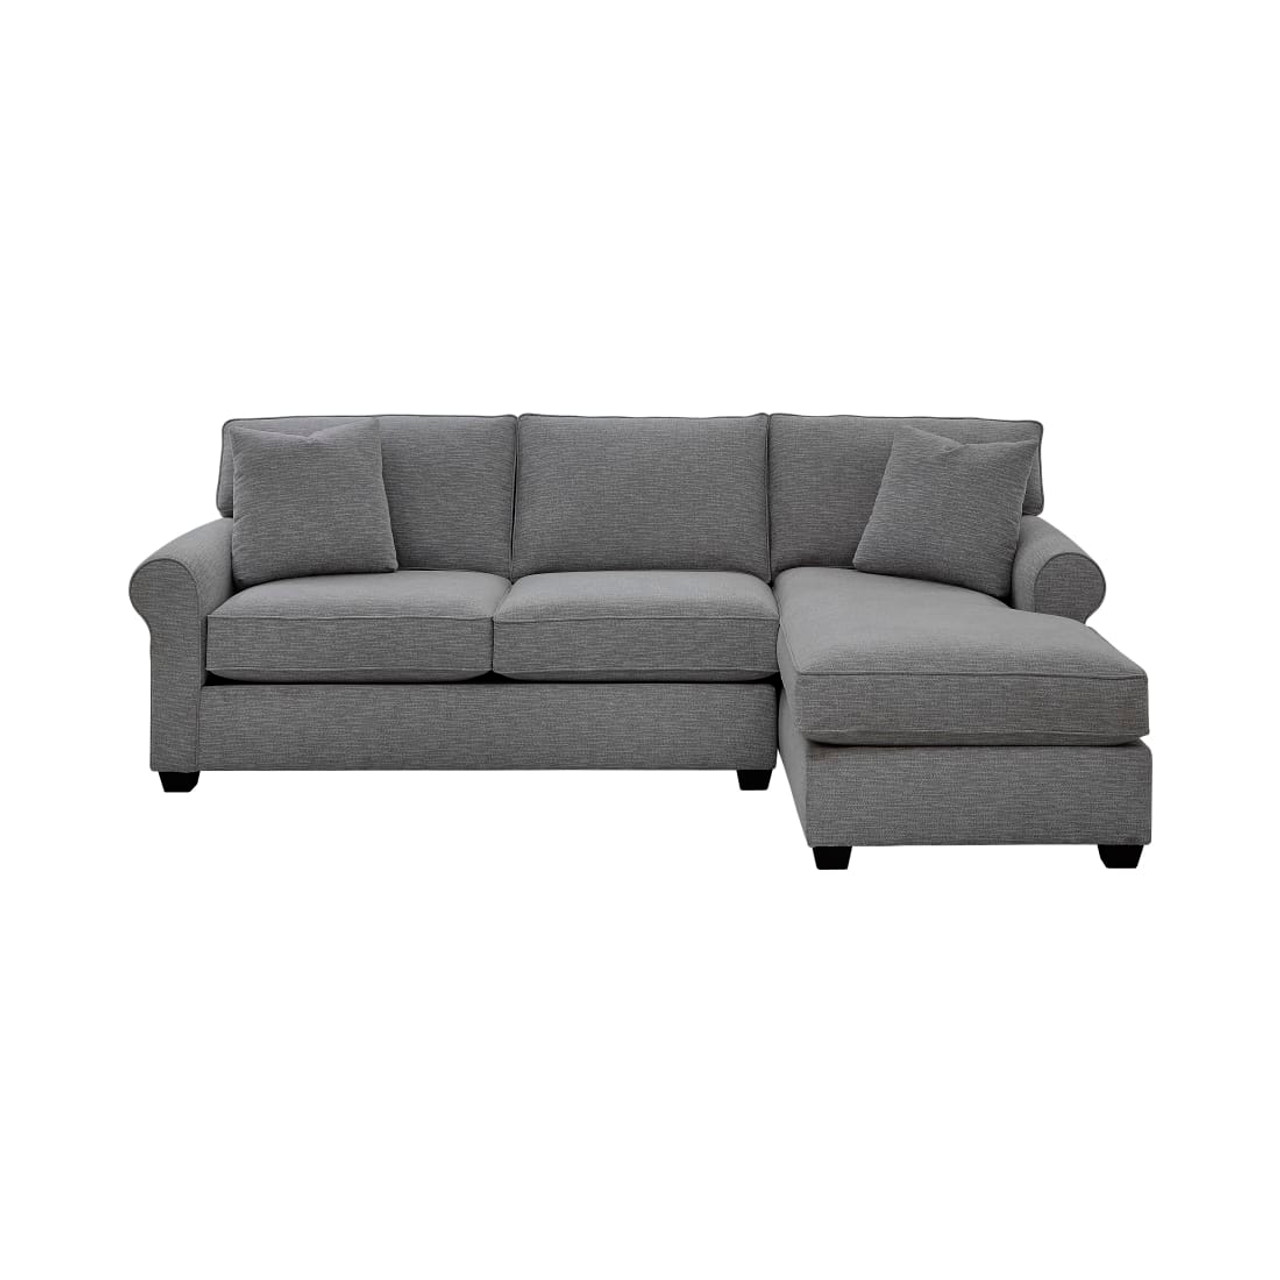 Crestview Rolled Arm Graphite 2-pc sectional w/ right chaise